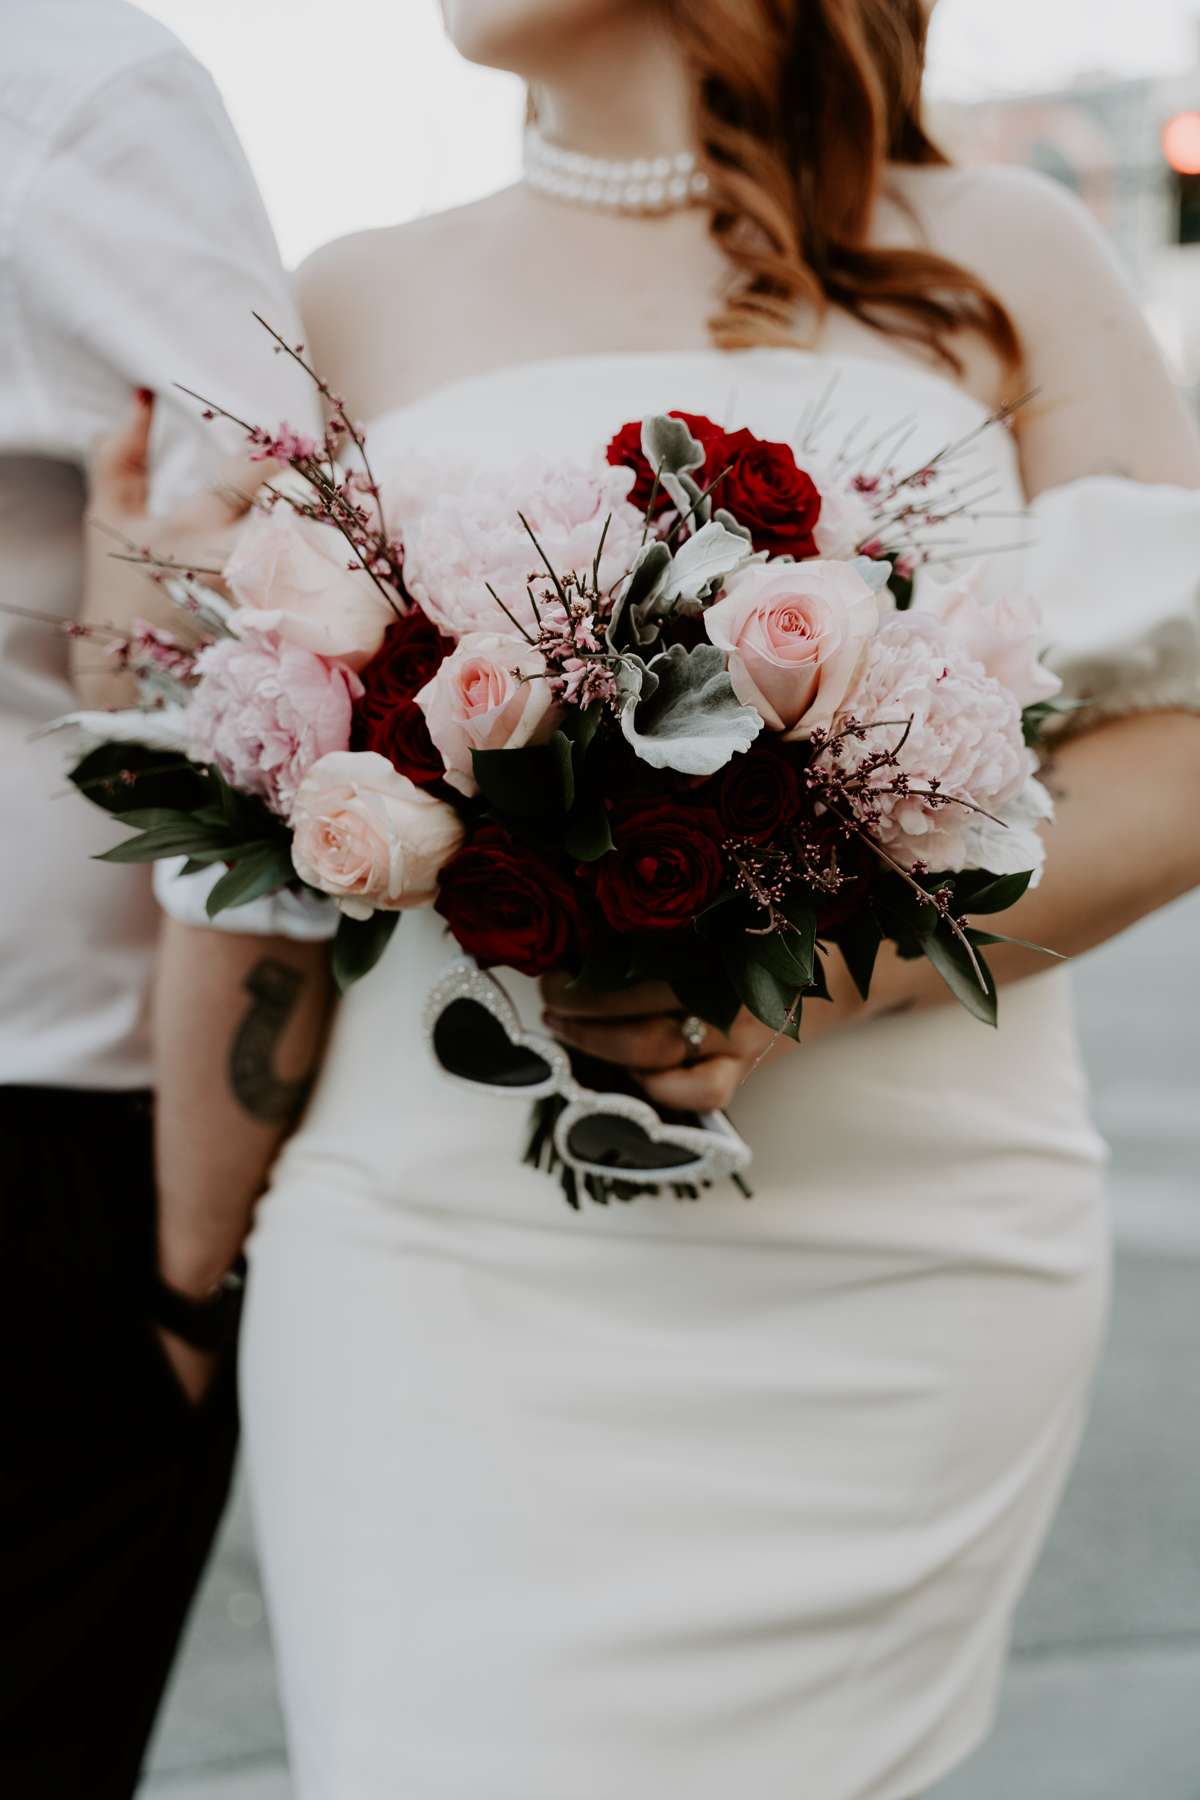 https://www.rocknrollbride.com/wp-content/uploads/2023/07/Are-Bridal-Parties-Going-Out-of-Style-14.jpg